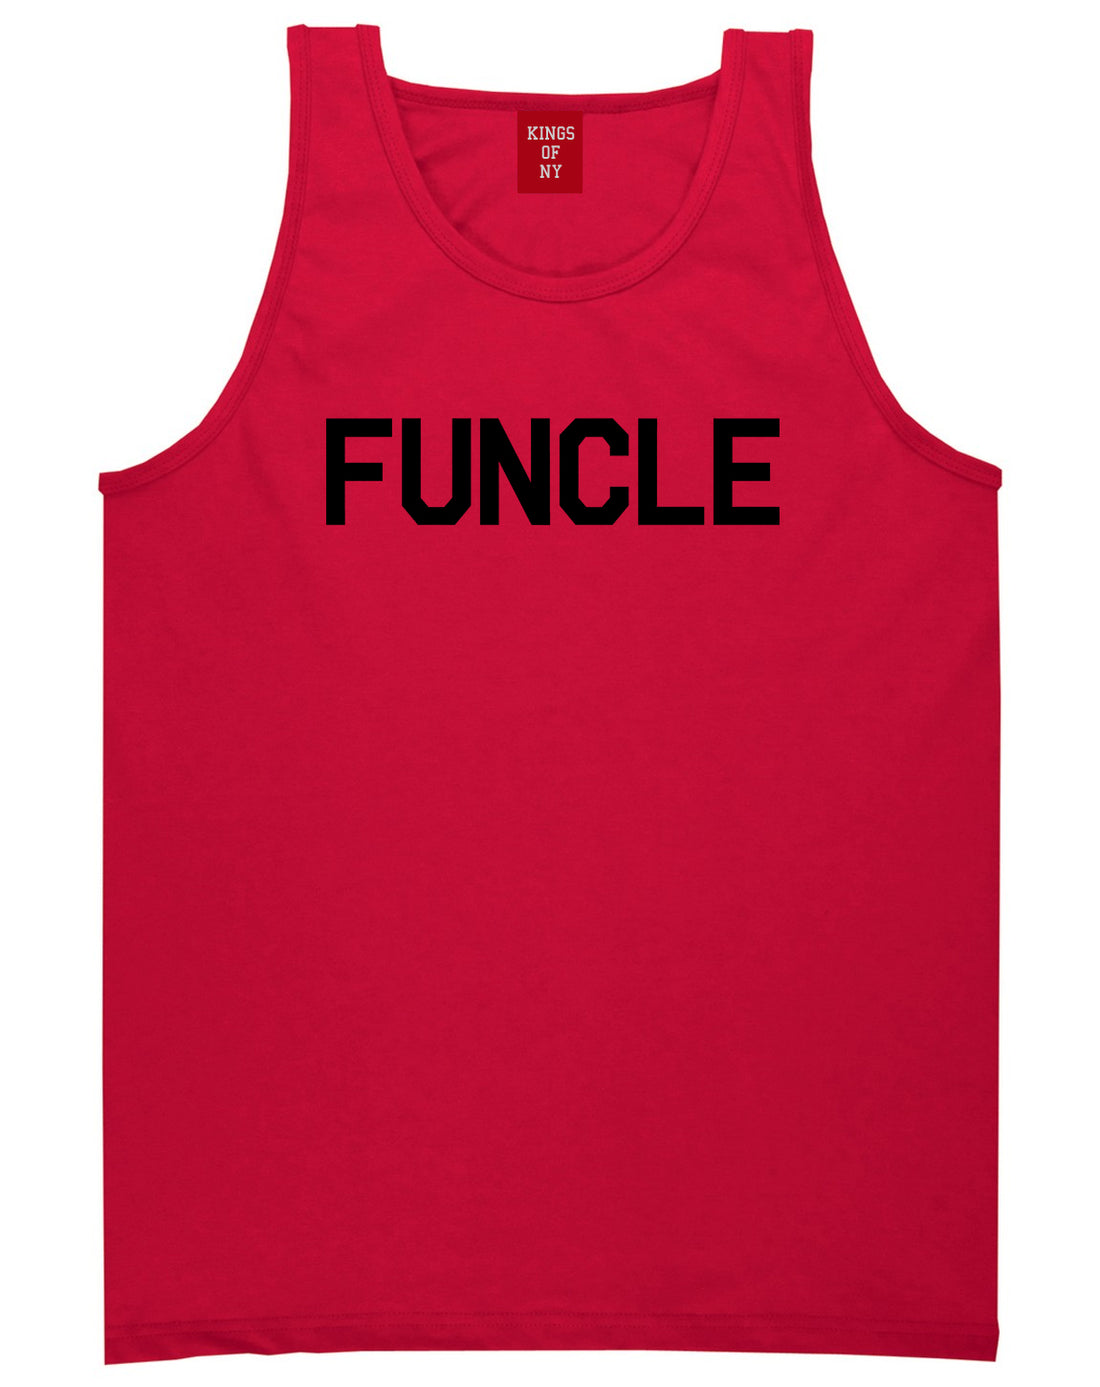 Funcle Fun Funny Uncle Mens Tank Top T-Shirt Red